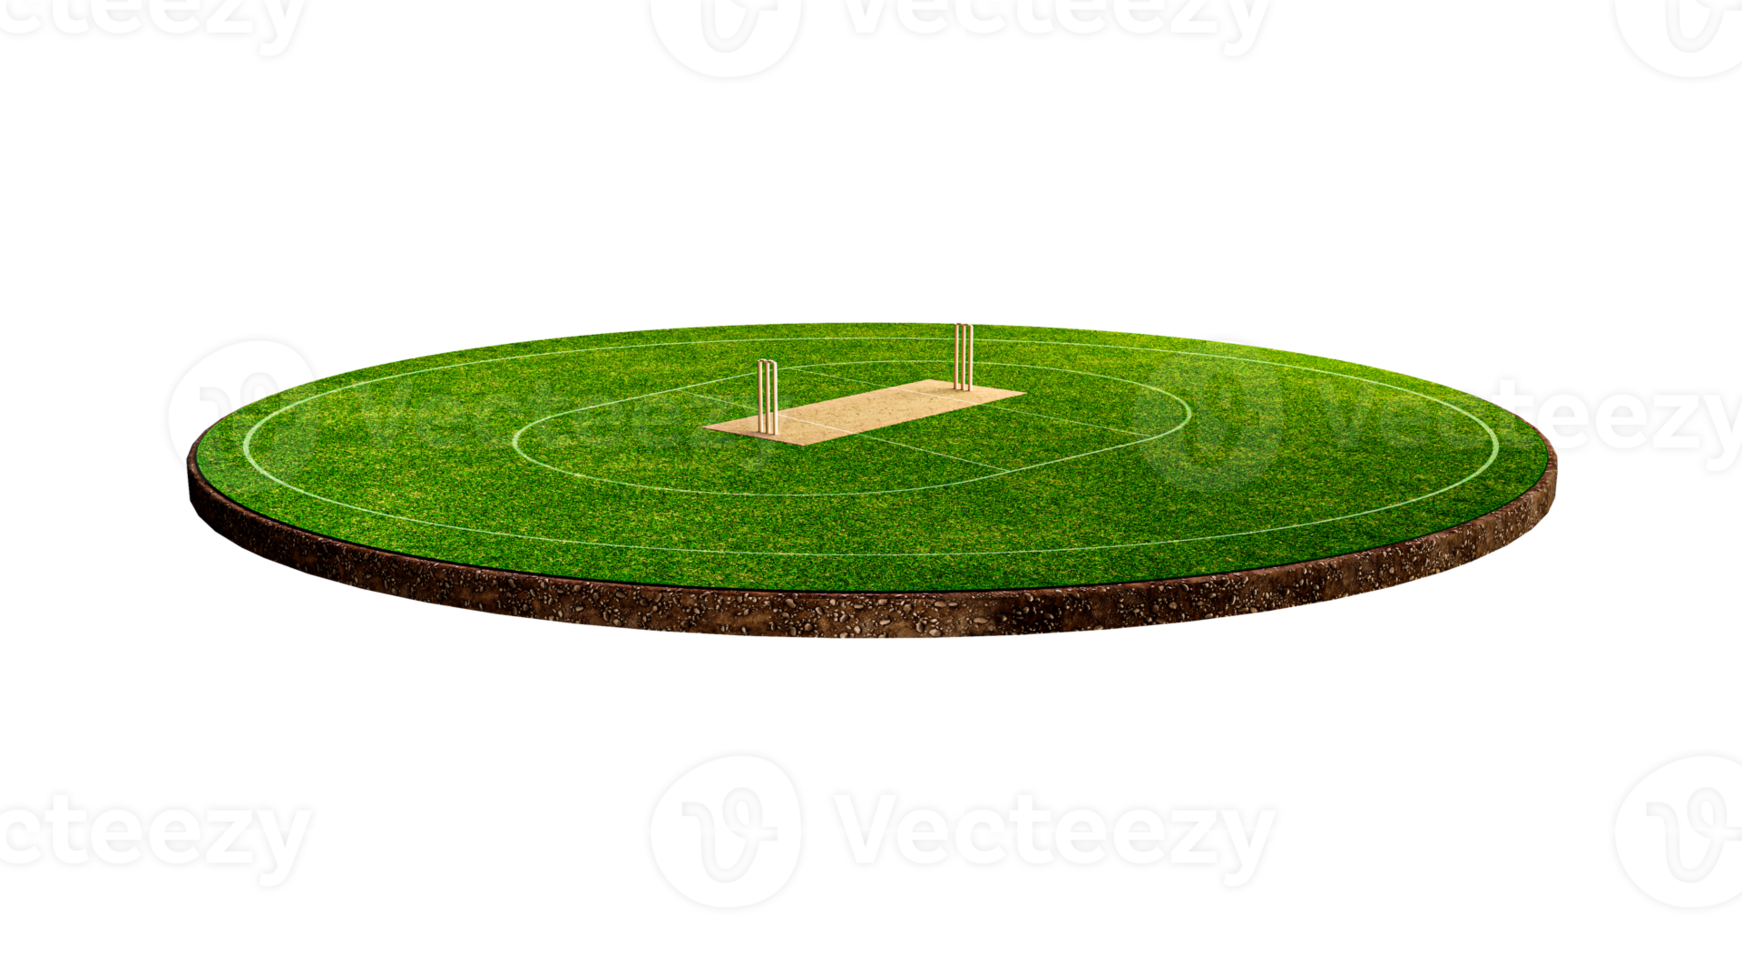 Cricket Stadium Front view on cricket pitch or ball sport game field, grass stadium or circle arena for cricketer series, green lawn or ground for batsman, bowler. Outfield 3D Illustration png